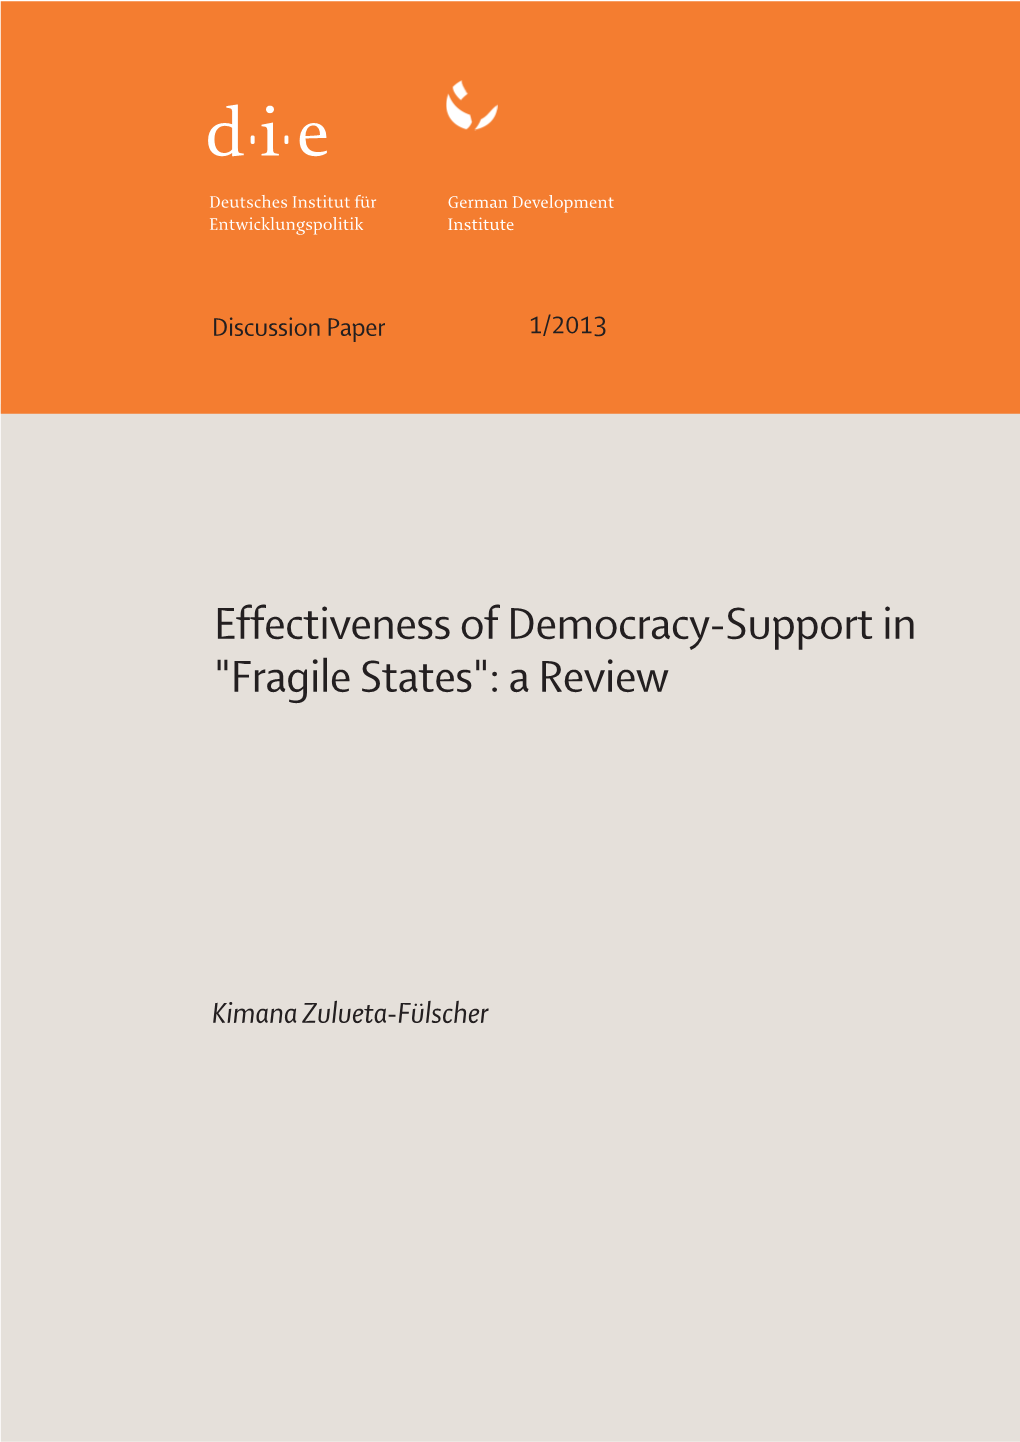 Effectiveness of Democracy-Support in "Fragile States": a Review